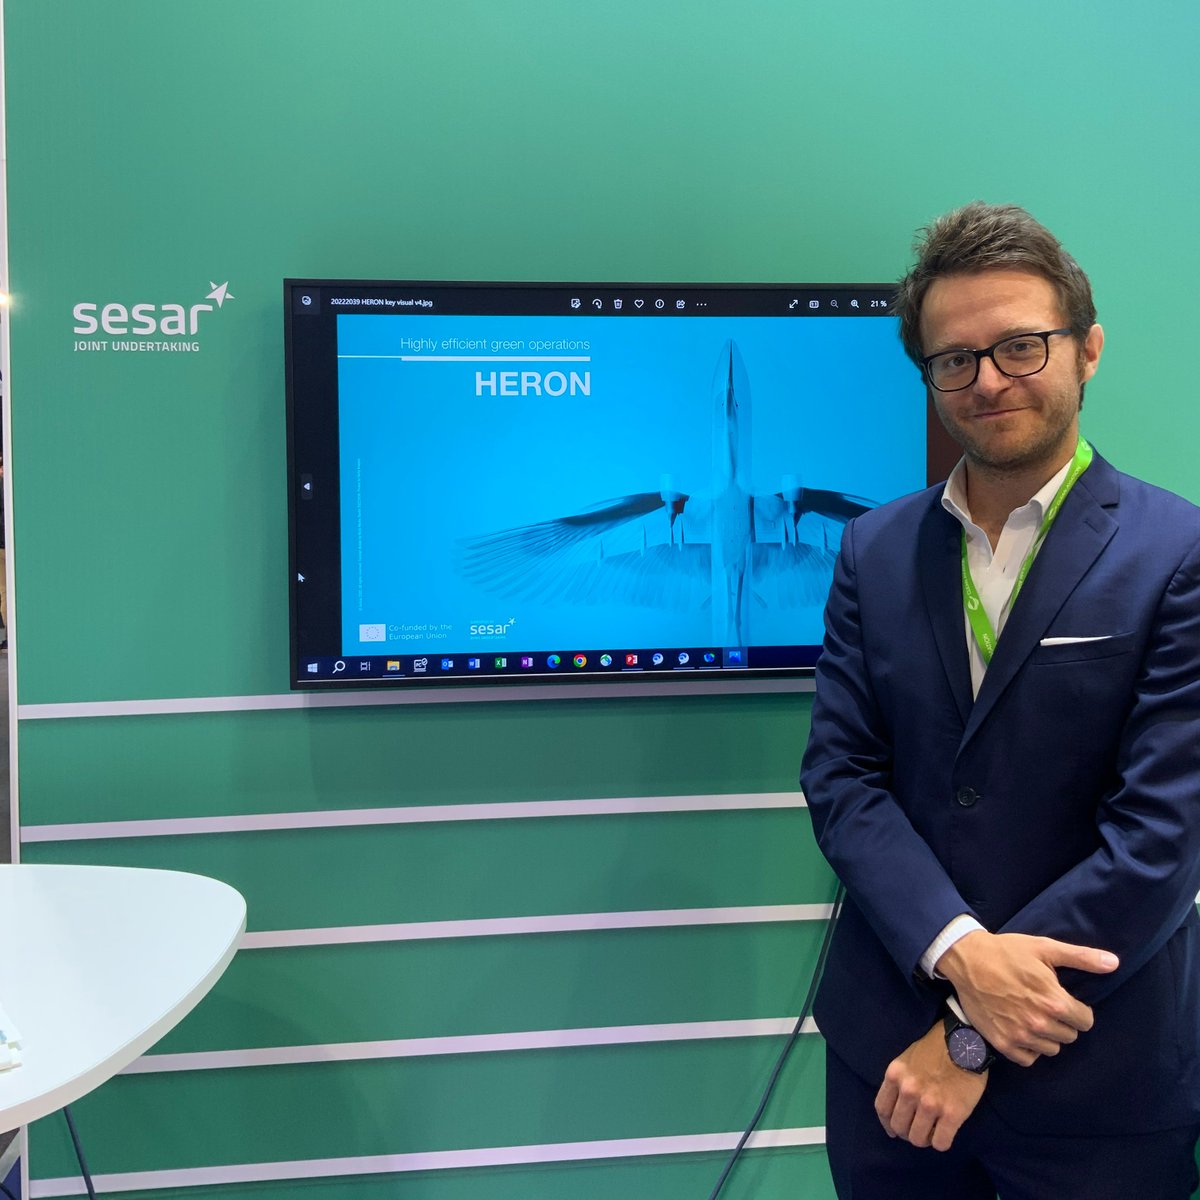 Live now from #ParisAirShow @salondubourget ✈️ 
Our coordinator Mattia Nurisso from @Airbus is ready to present the #HERON project! 

💡Do not miss it!
📍Hall 2A, stand #B276 - 10:00-11:00

#SustainableAviation #EUGreenDeal #GreenAviation #SESAR3JU @SESAR_JU @cinea_eu